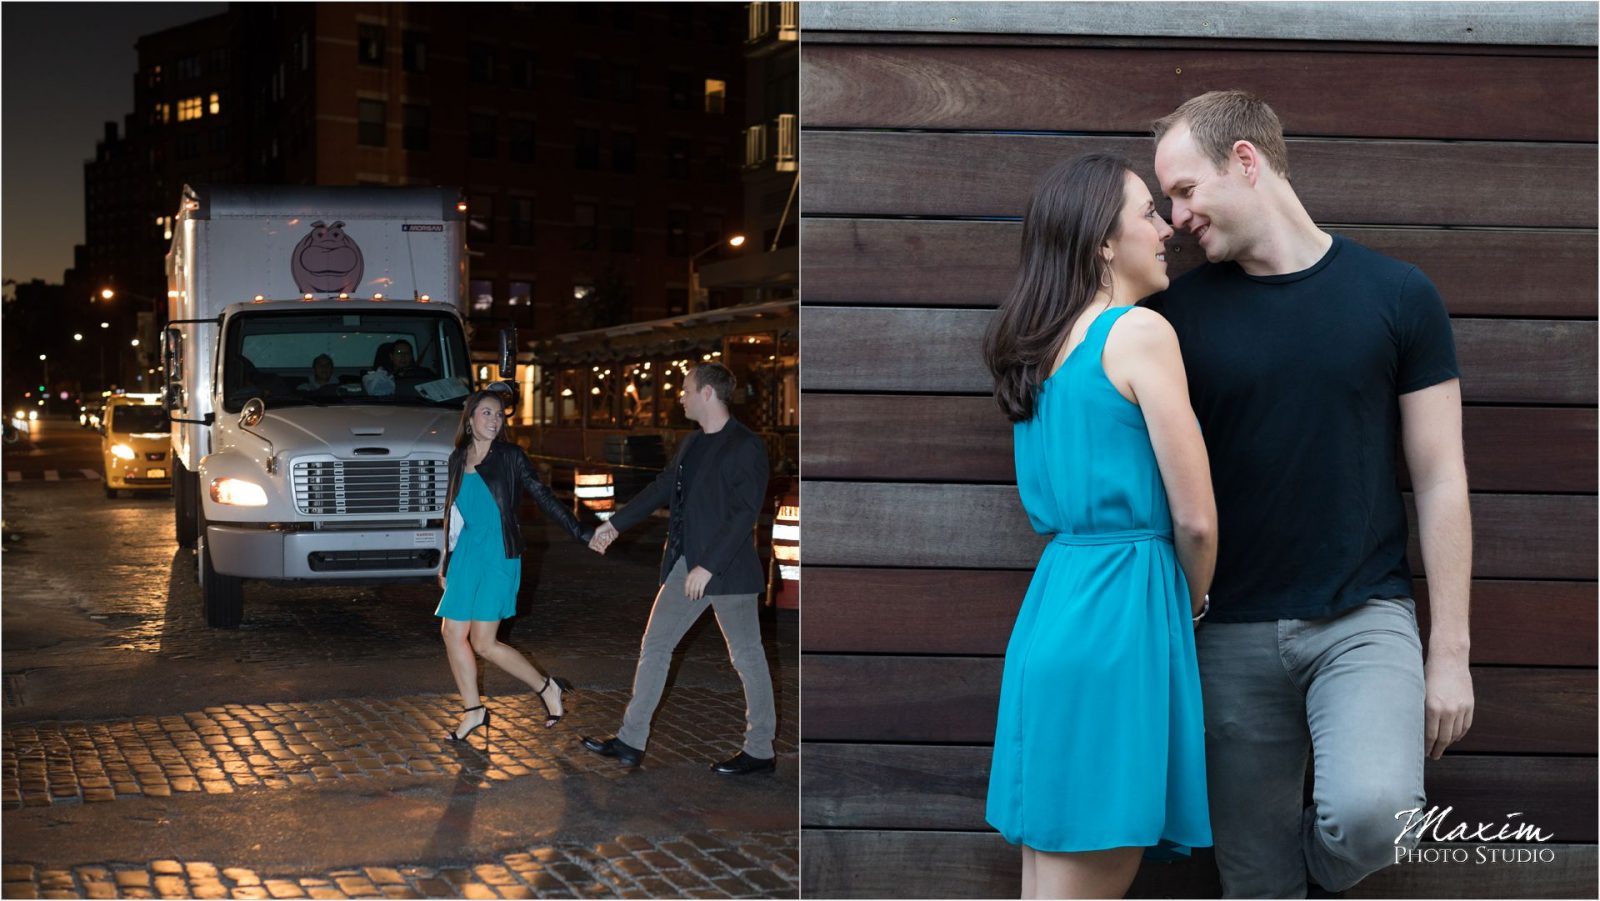 New York City Meatpacking District night Engagement